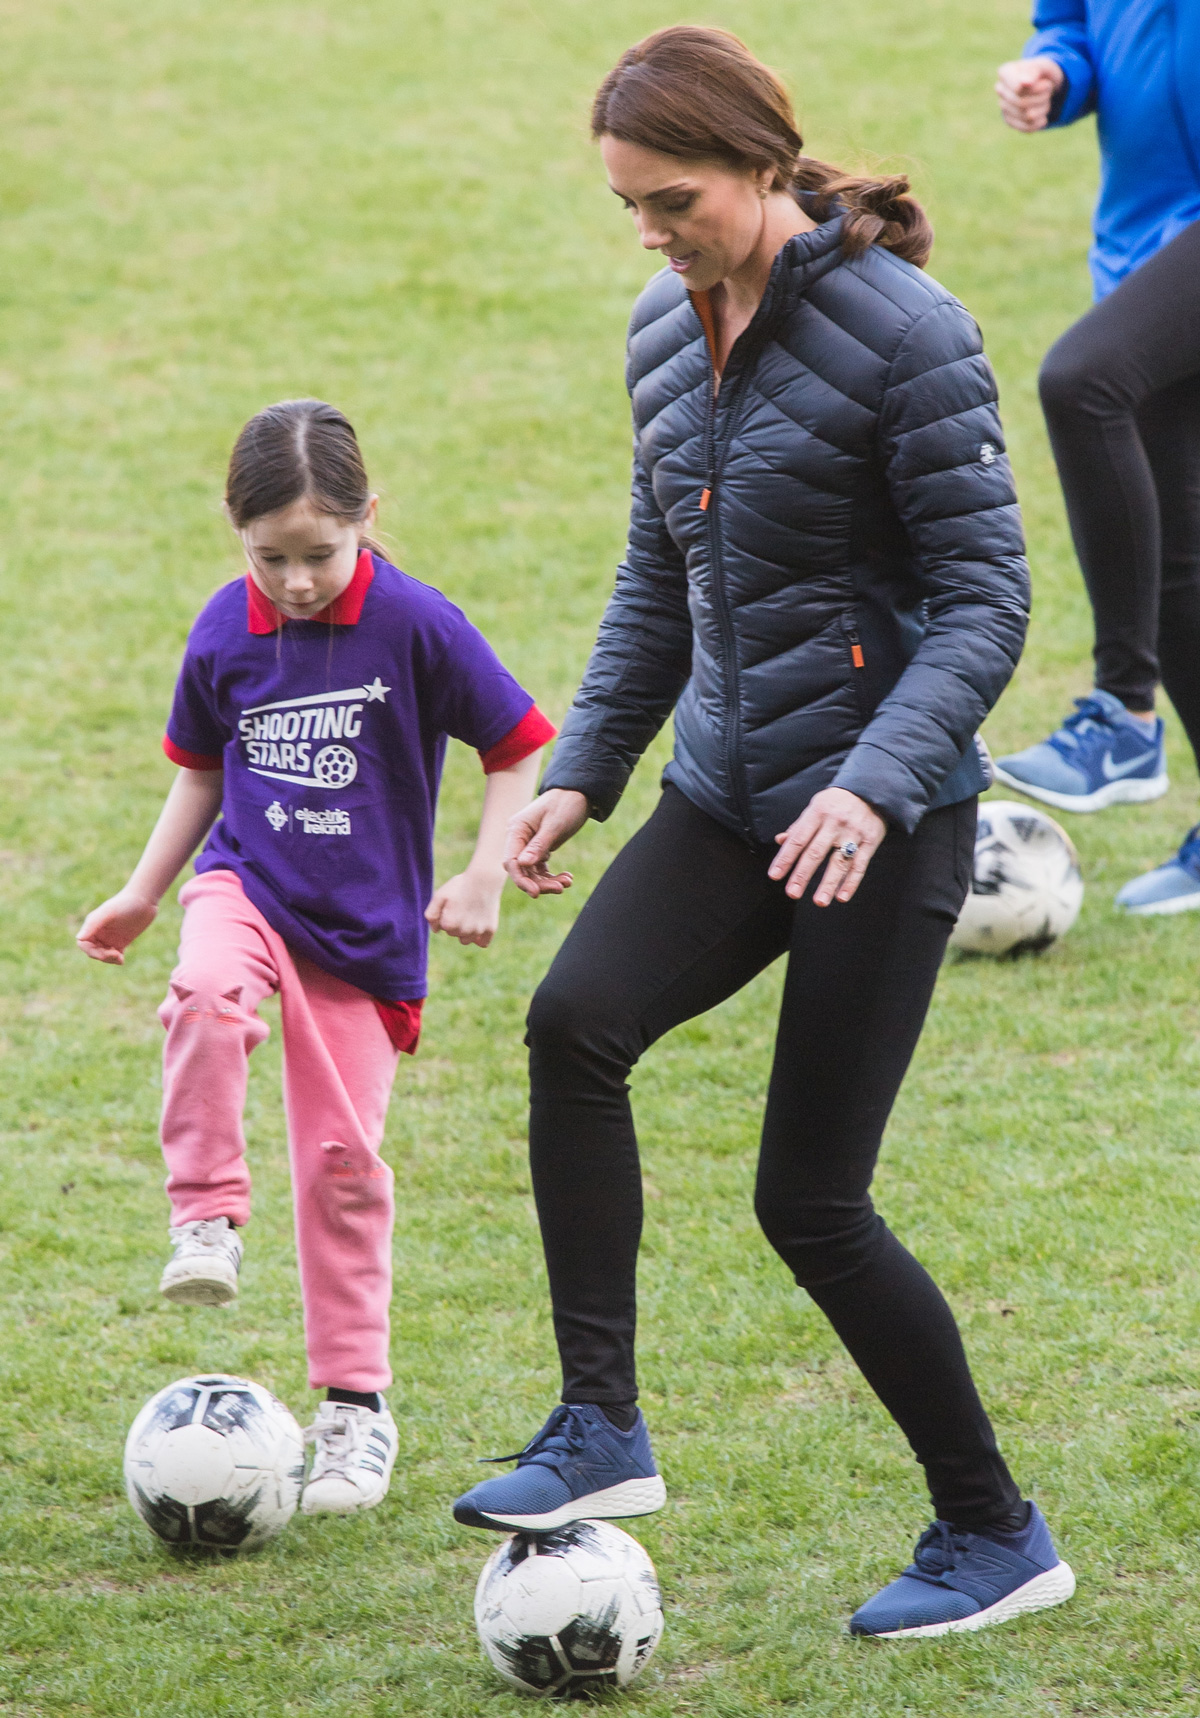 Kate Middleton Rocked Super Cute New Balance Sneakers at the